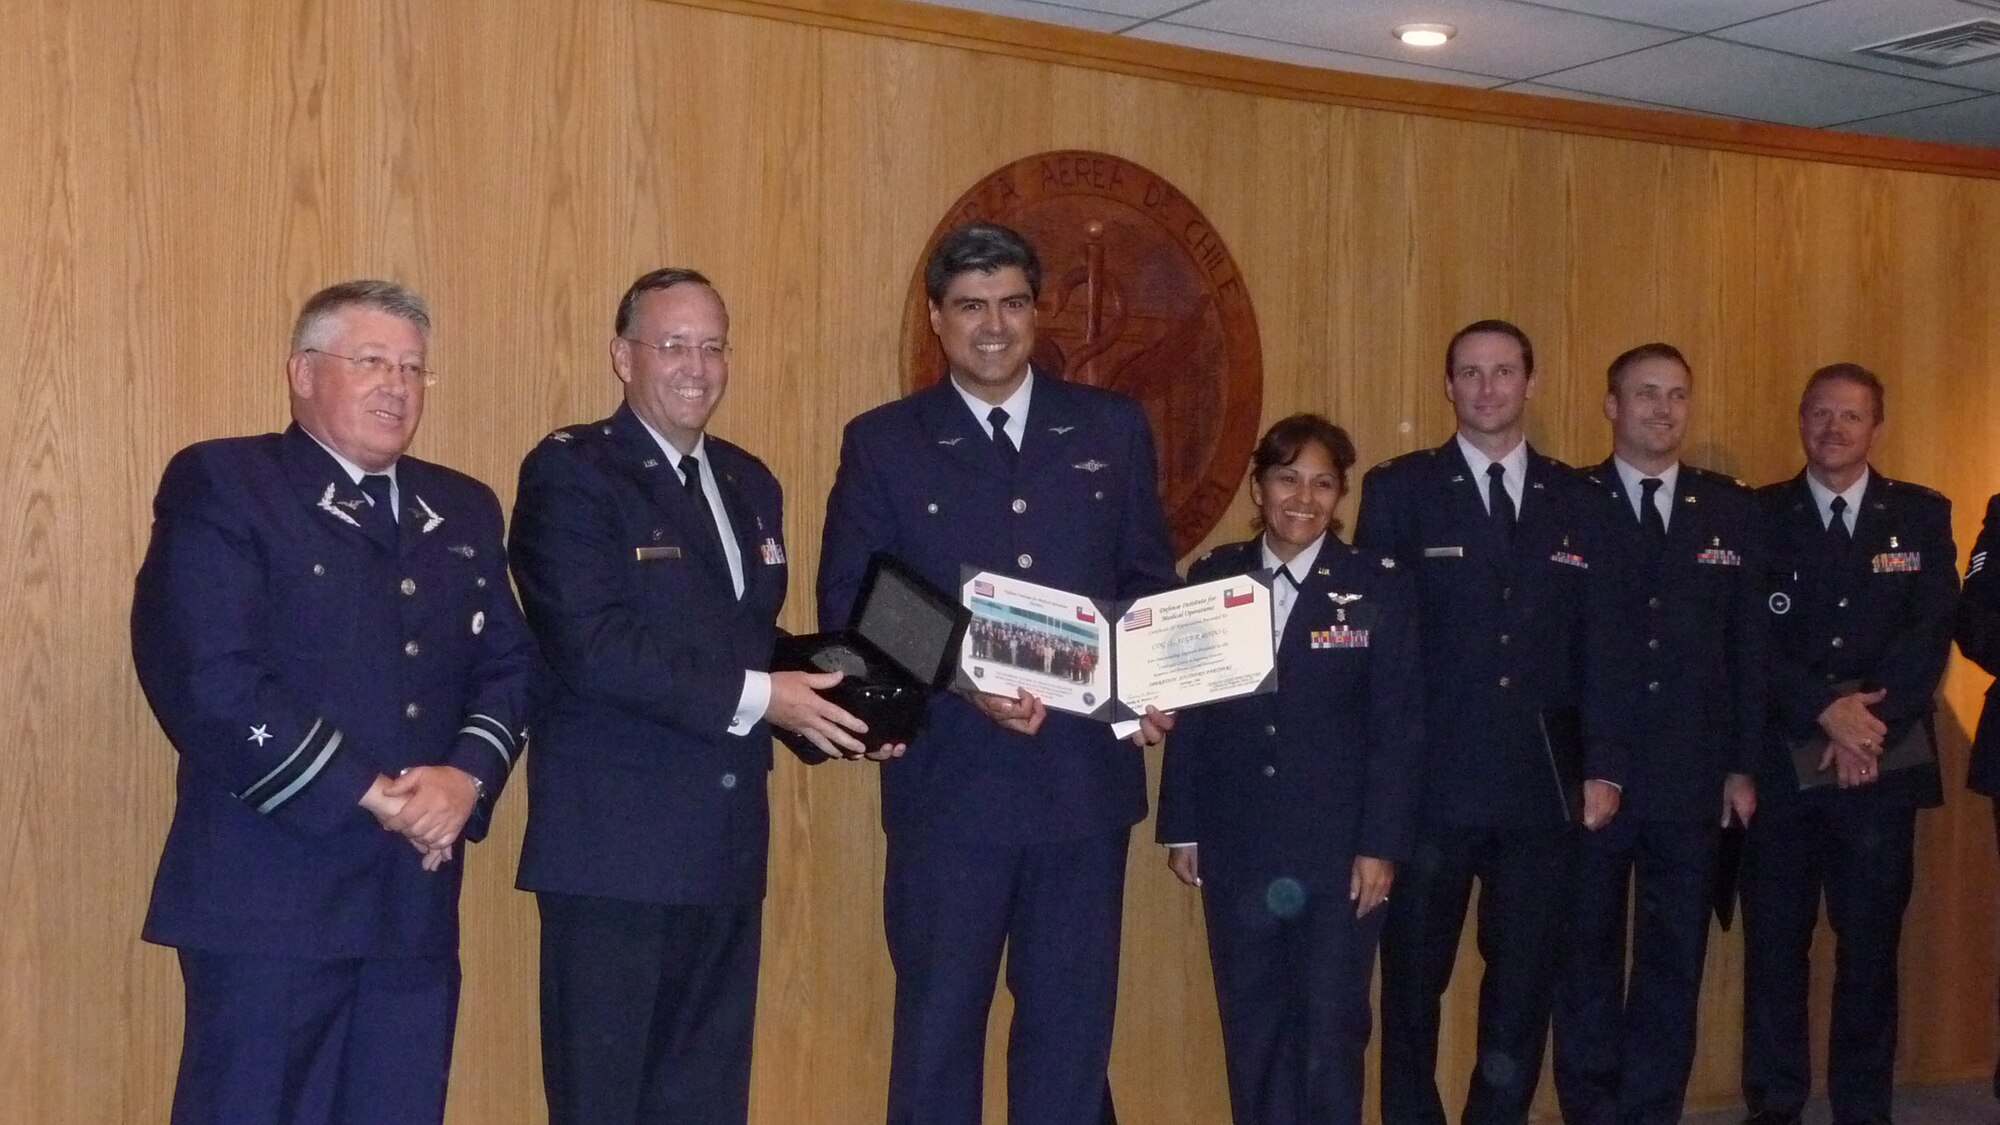 Lt. Col. Alger Rodó, chief of operative medicine with the Chilean Air Force, poses with members of the Defense Institute for Medical Operations during the graduation ceremony from the multi-national disaster response course on 4 Nov.  The Defense Institute for Medical Operations course is part of Operation Southern Partner; an AFSOUTH-led event aimed at providing intensive, periodic subject matter exchanges with partner nations in the U.S. Southern Command area of focus.  The all-new program features more than 70 U.S. Air Force subject matter experts from about 25 career fields working alongside partner nation military members in similar career specialties during week-long exchanges.  The next morning, Colonel Rodó led a tour of his hospital’s emergency room for U.S. Air Force doctors.  Later, Air Force doctors were able to sit in on a lecture where Chilean doctors evaluated different courses of action to treat patients.  (Photo  by Capt. Nathan D. Broshear)